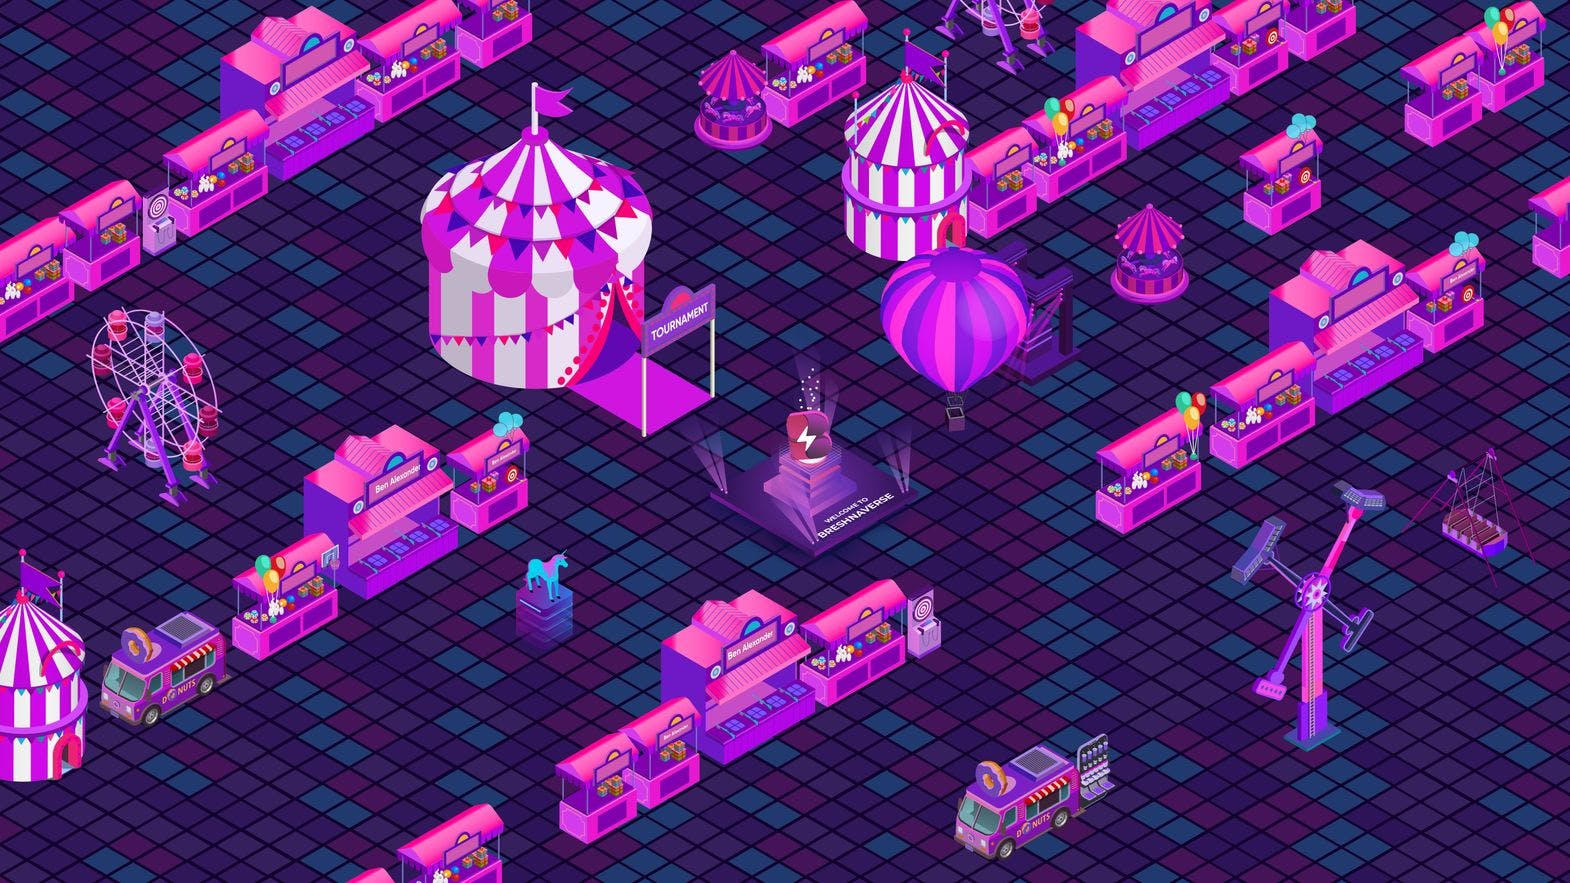 There will be a virtual carnival inside the Breshnaverse!